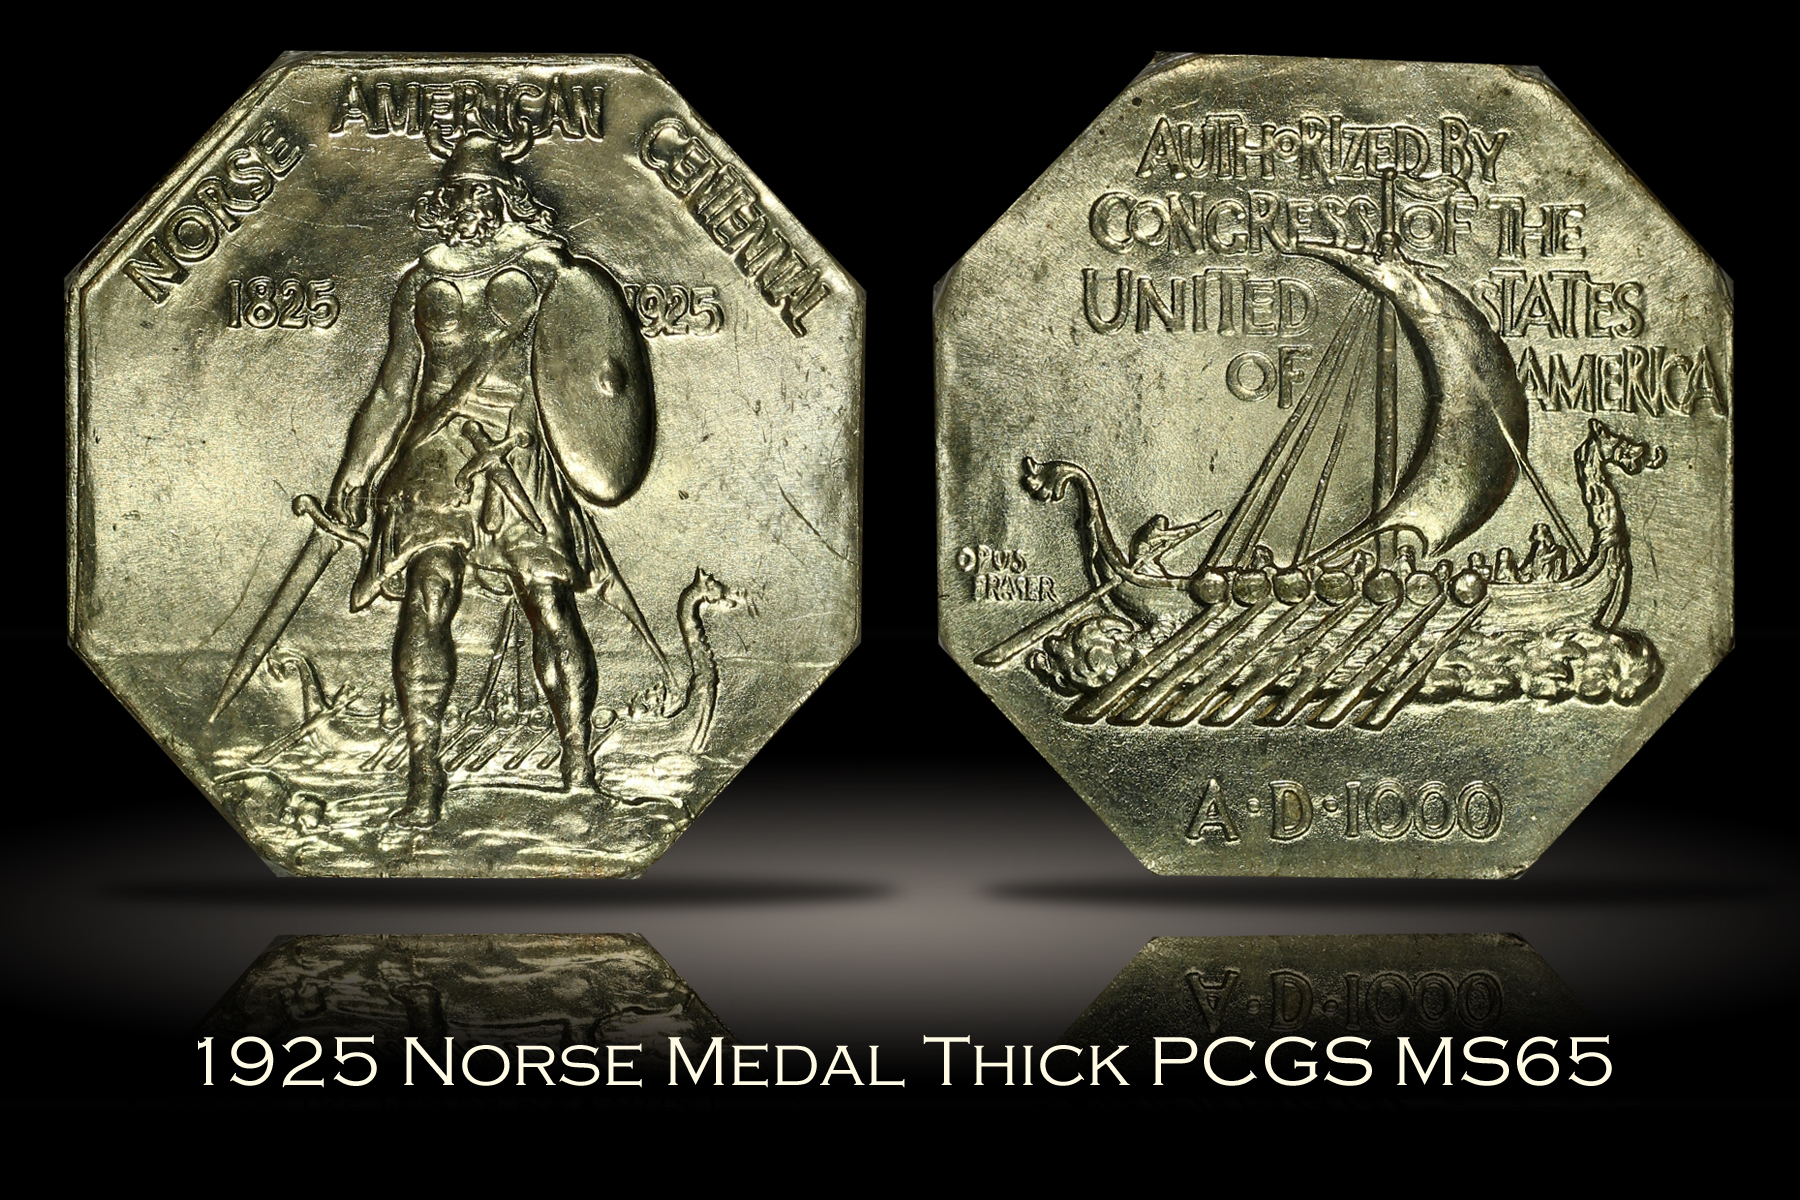 1925 Norse Medal Thick PCGS MS65